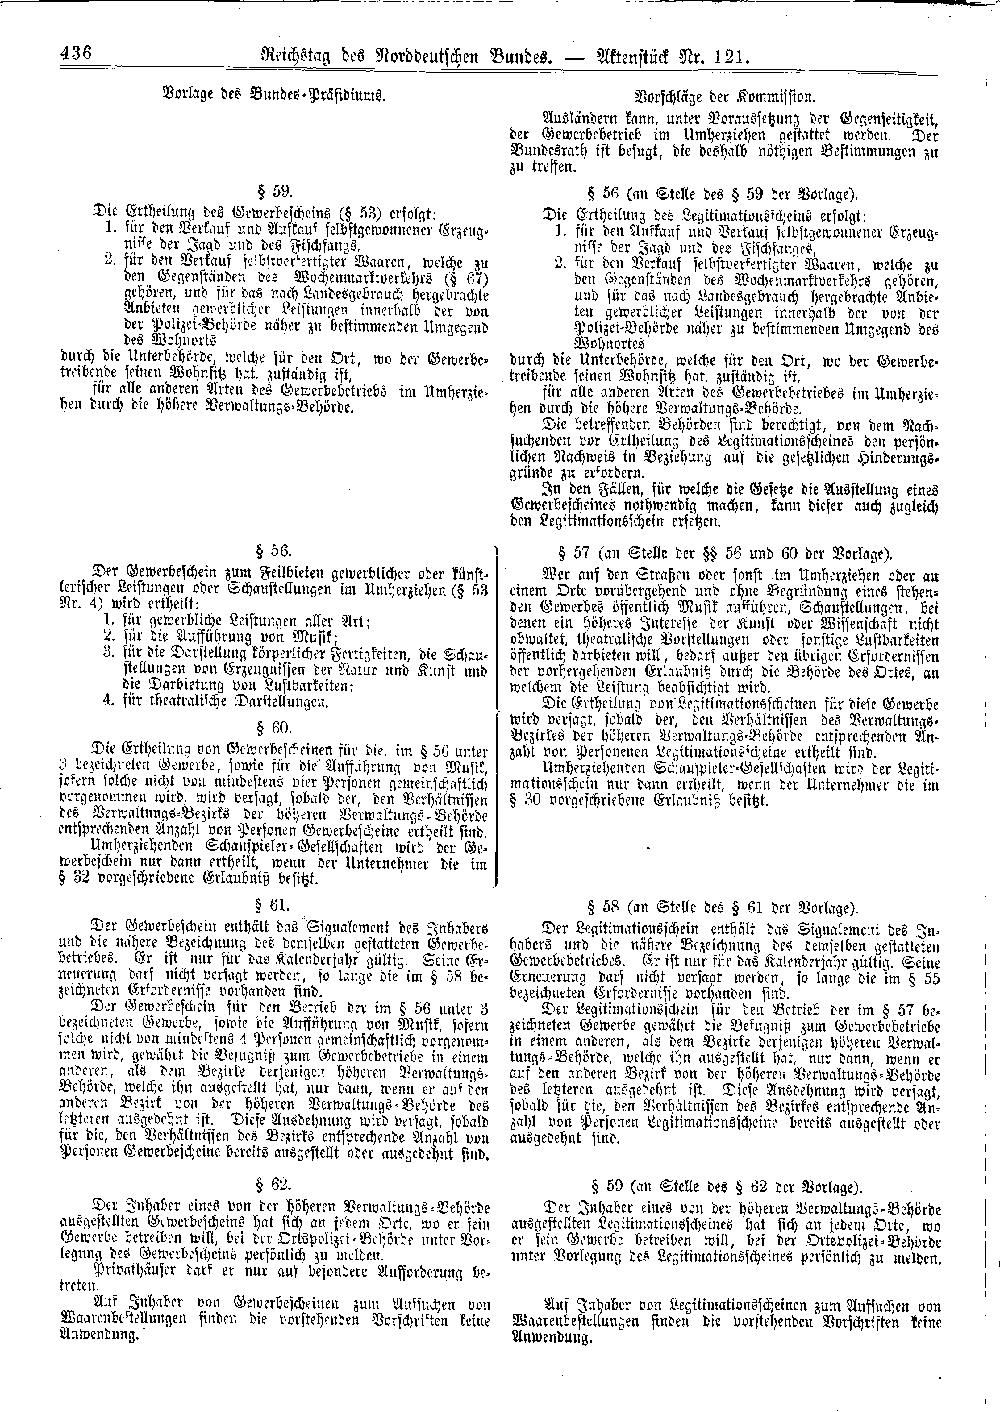 Scan of page 436